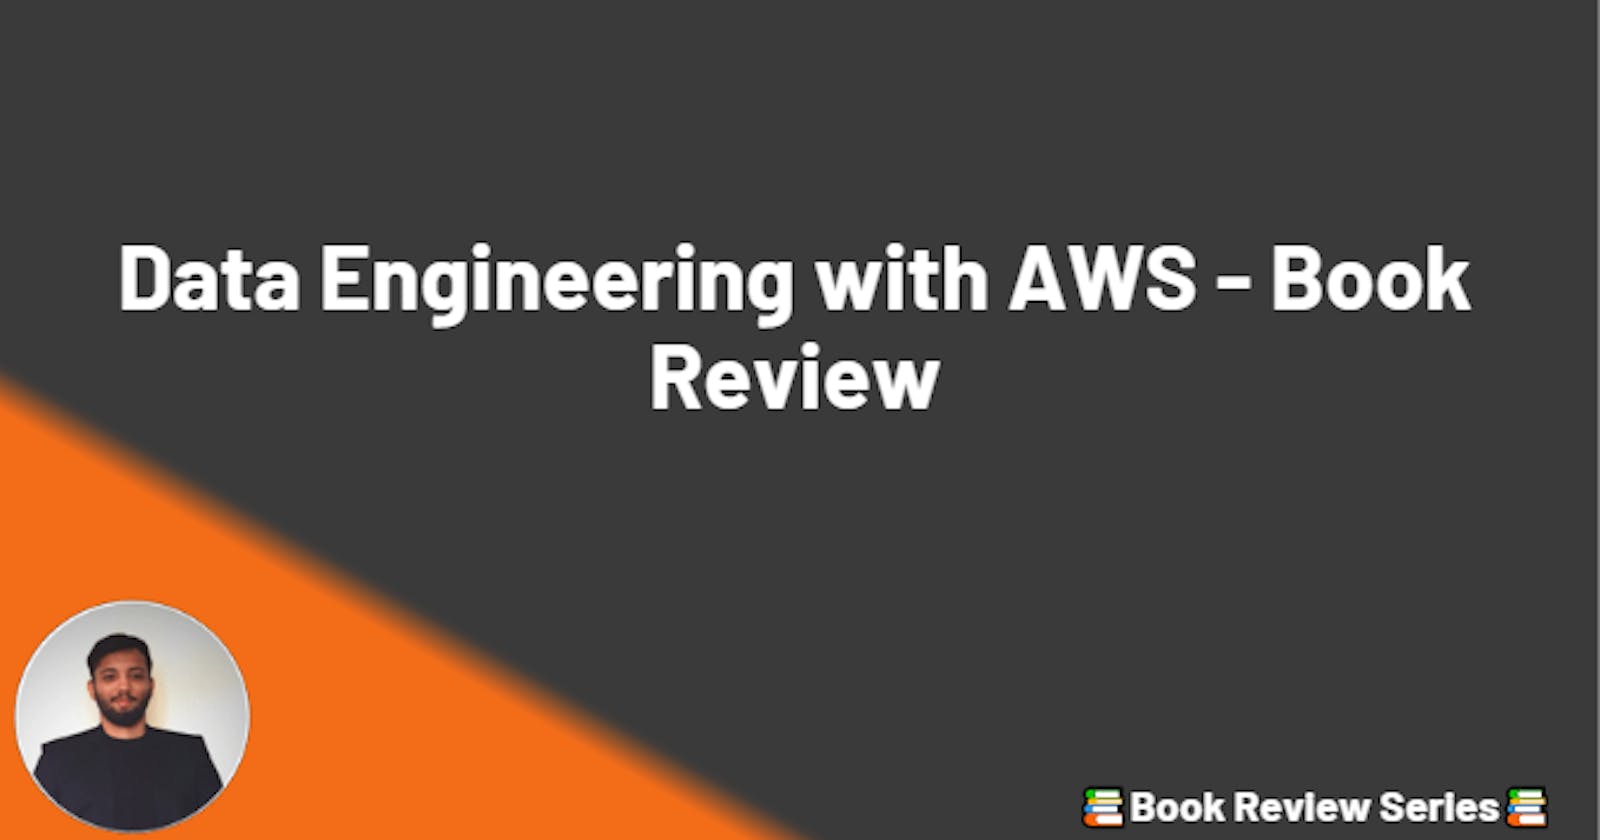 Data Engineering with AWS - Book Review